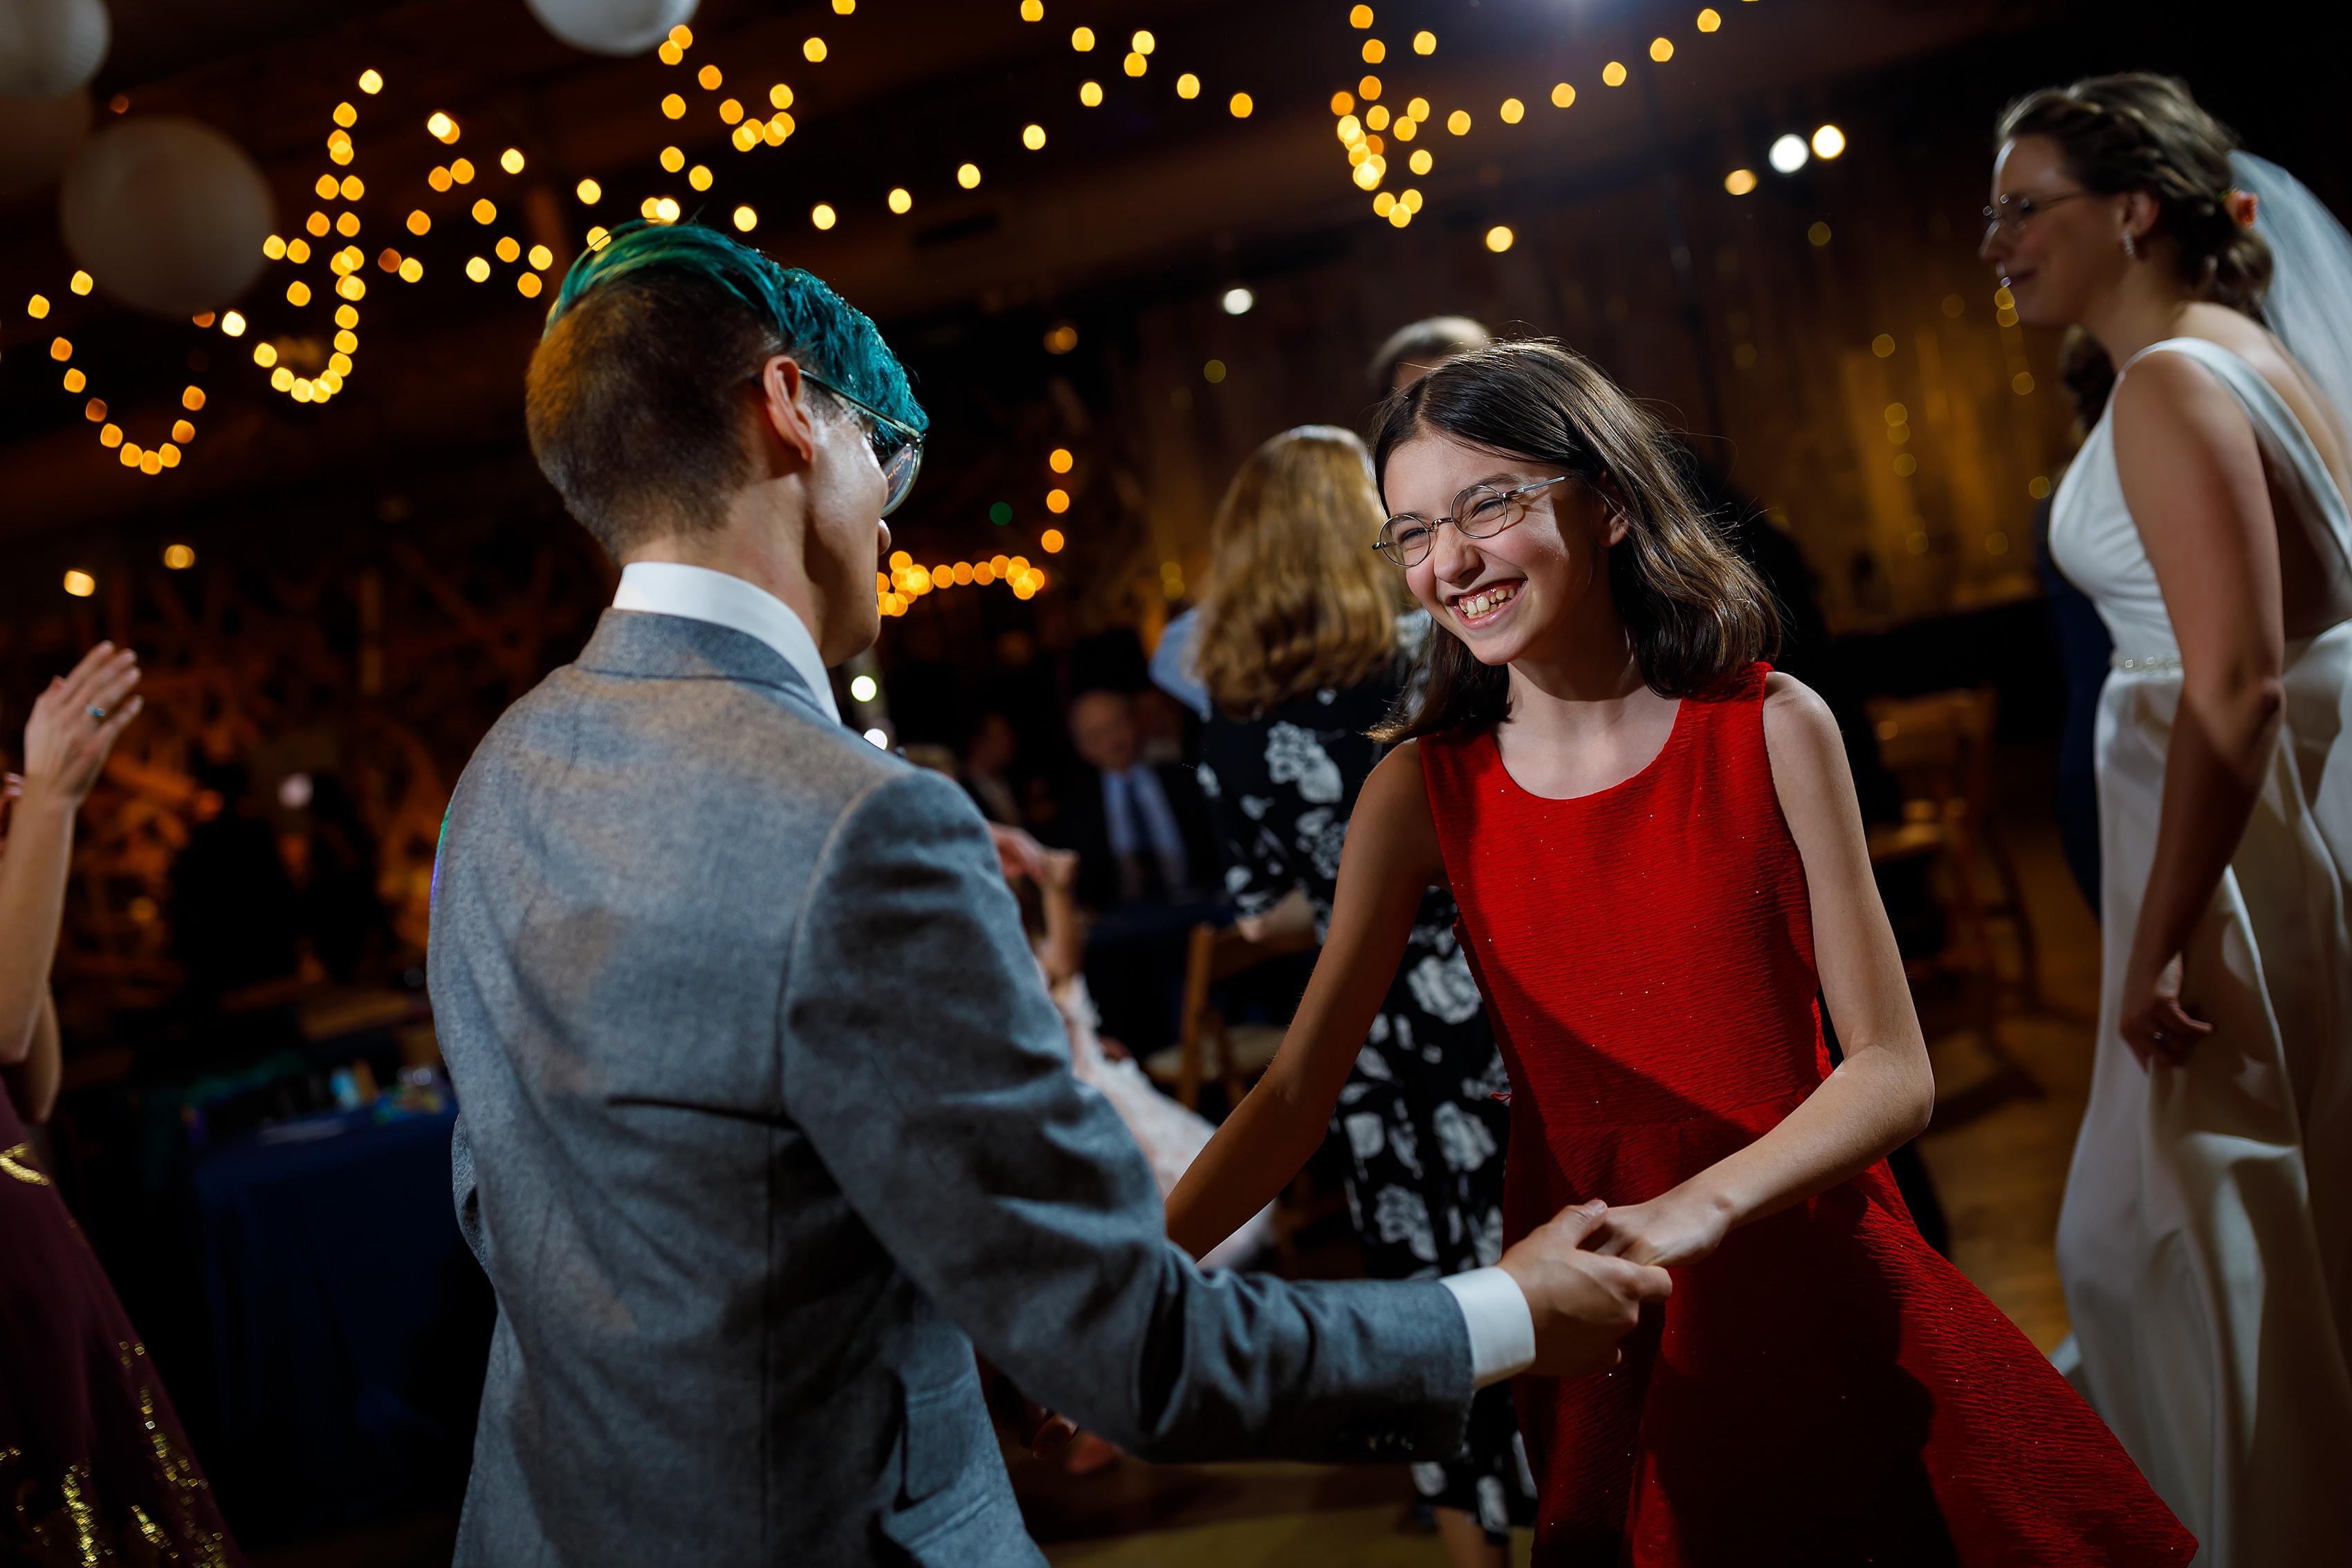 wedding guests dance during wedding reception at Rust Belt Market in downtown Ferndale, Michigan